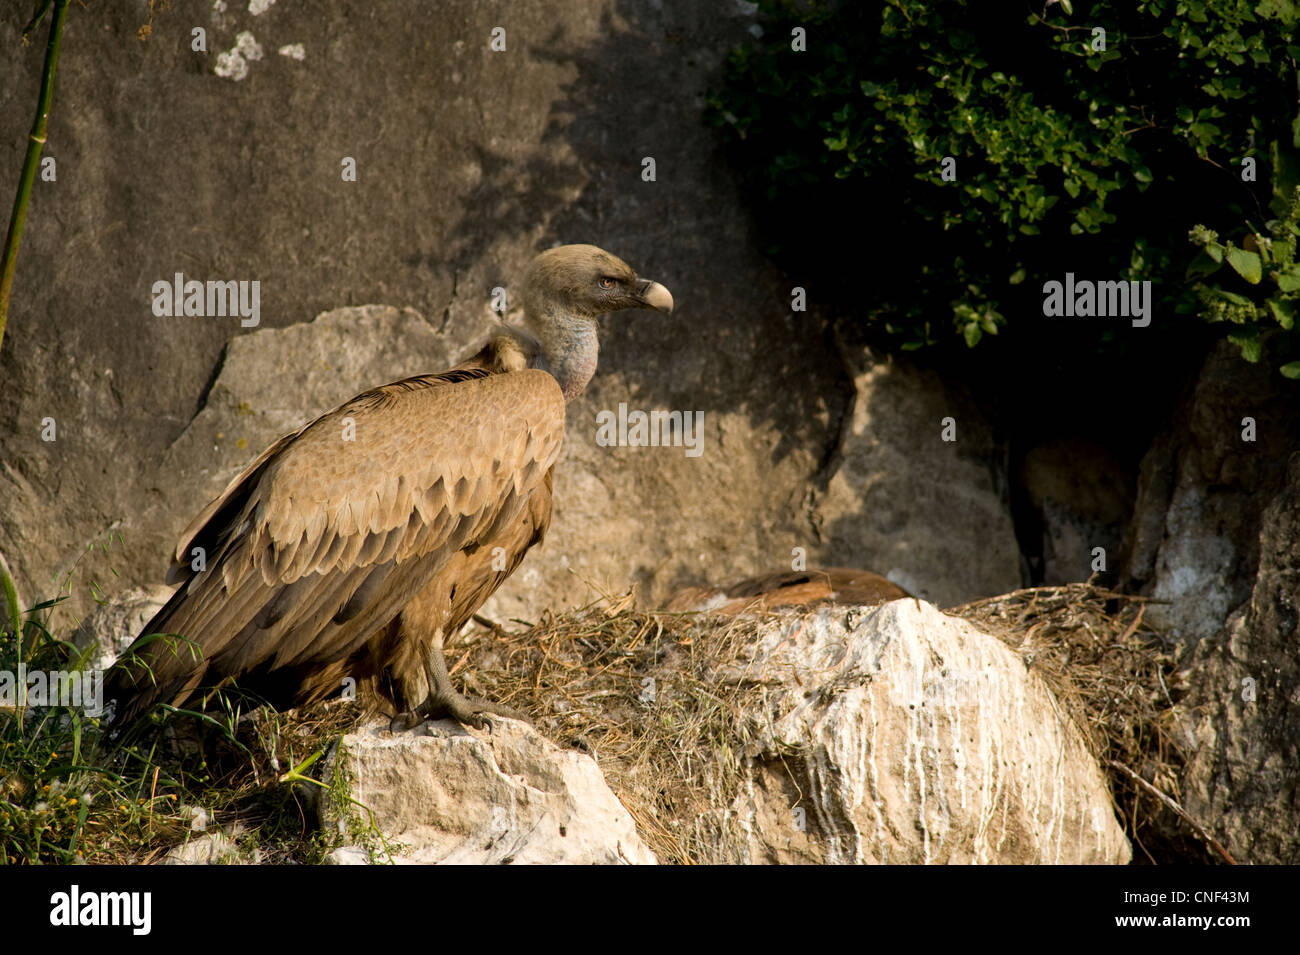 Adult Griffon Vulture standing on edge of nest with back of chick visible at rear of nest Stock Photo